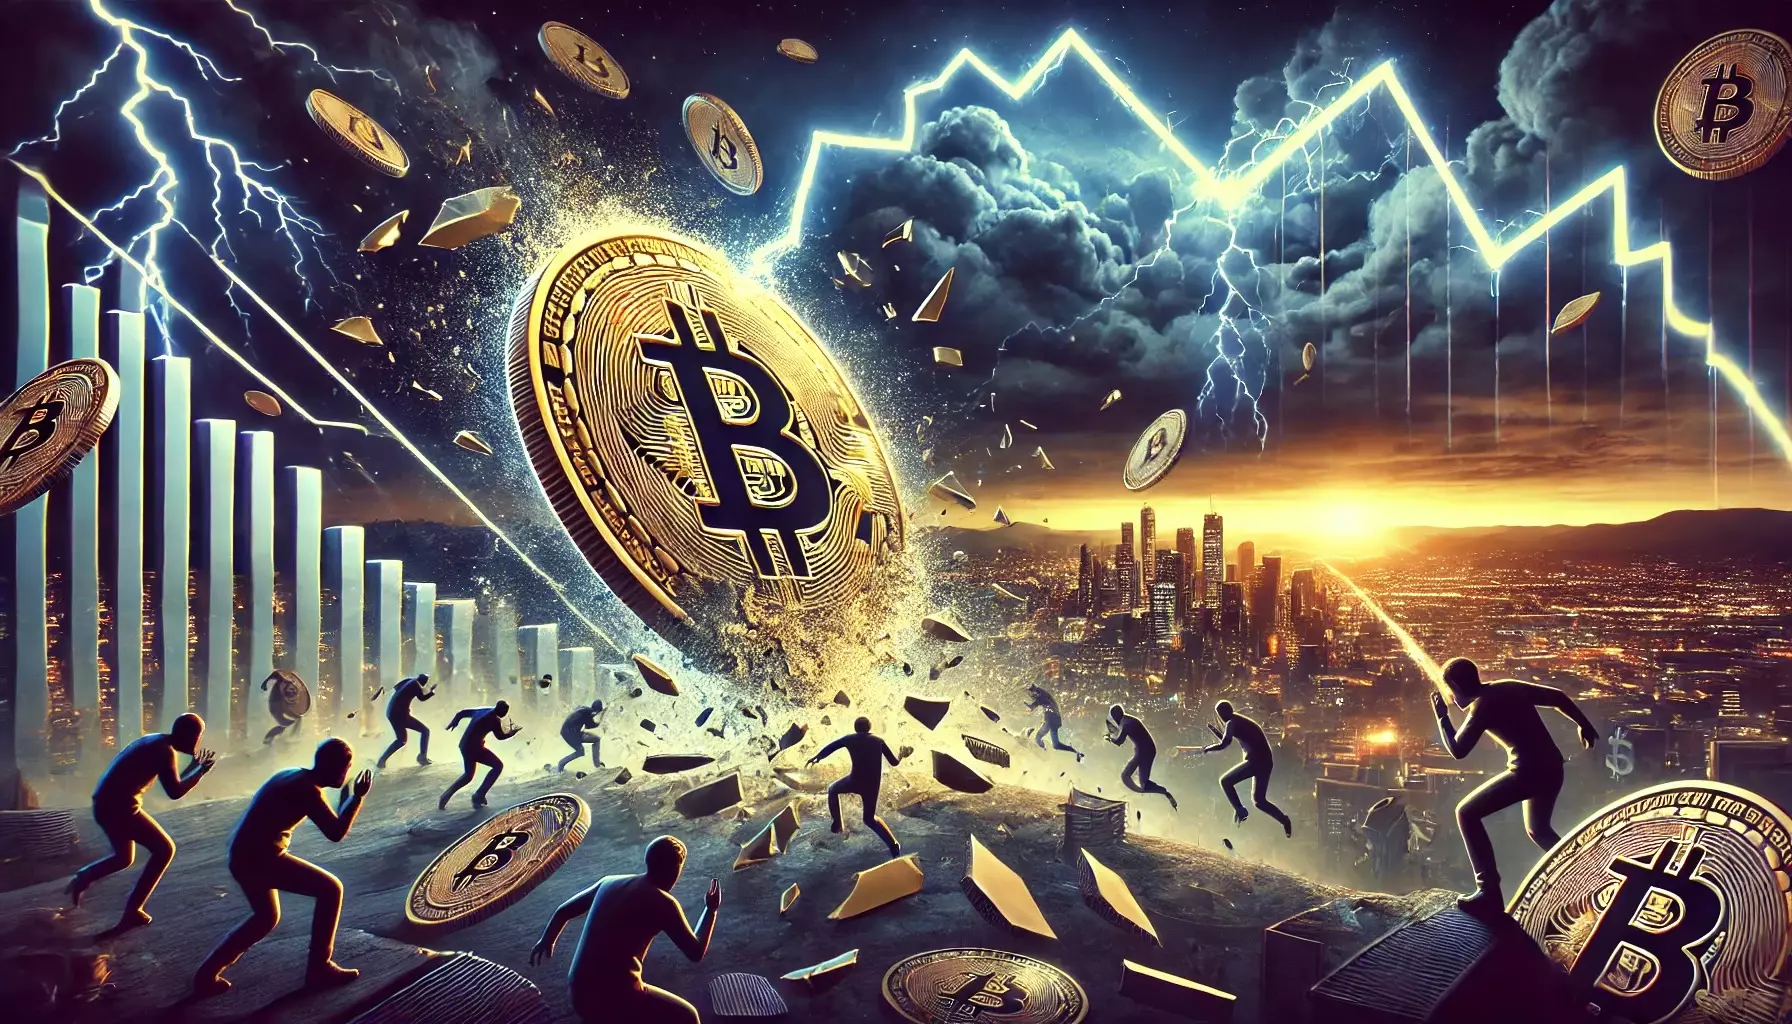 The Battle of Bitcoin Predictions